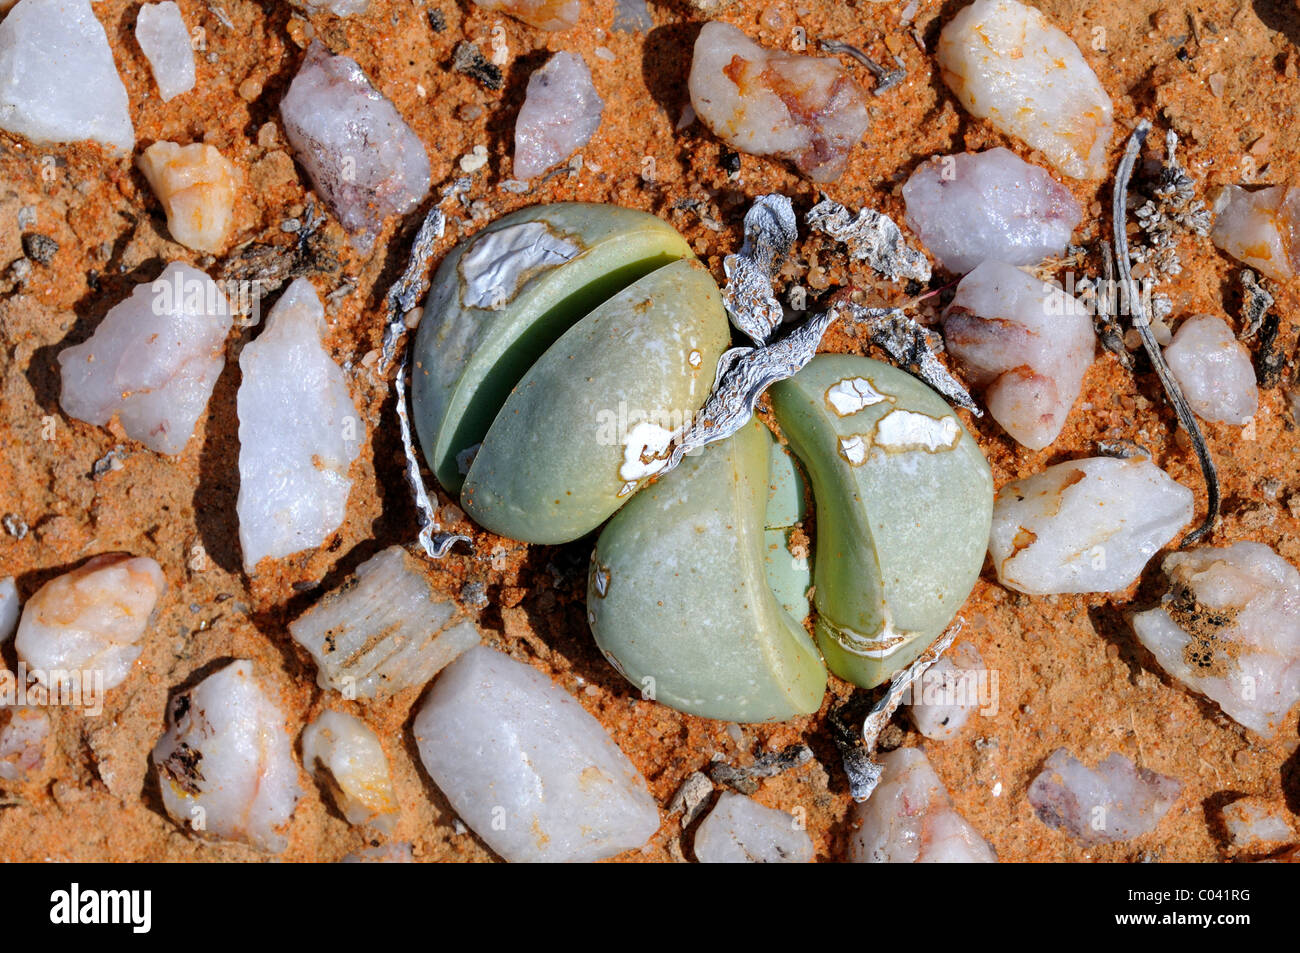 Argyroderma sp. in the quartz field of Knersvlakte, Namaqualand, South Africa Stock Photo